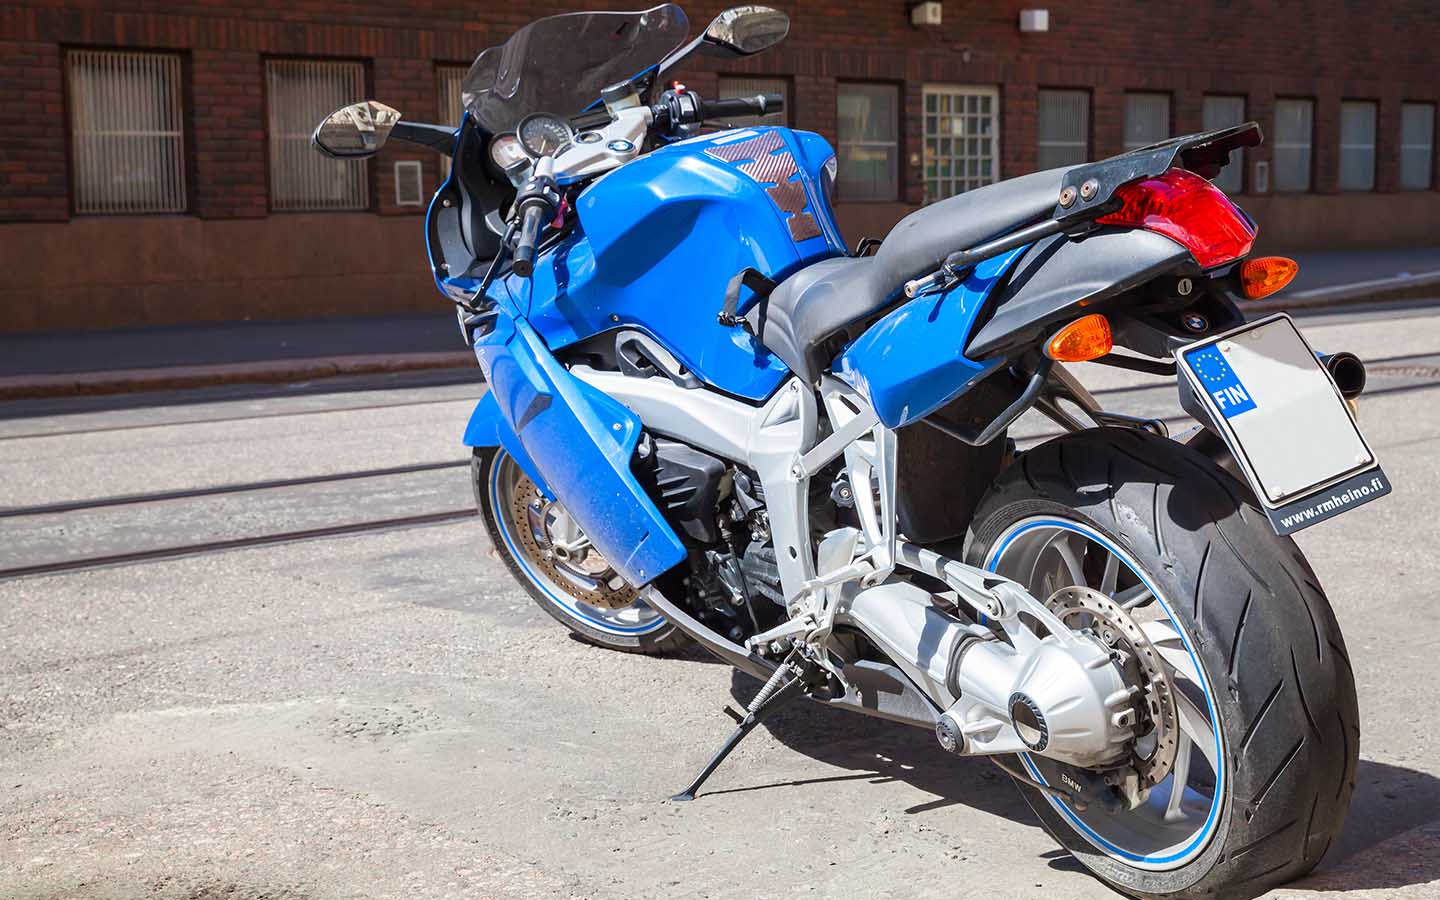 the K 1200S is one of the fastest motorcycles in the world